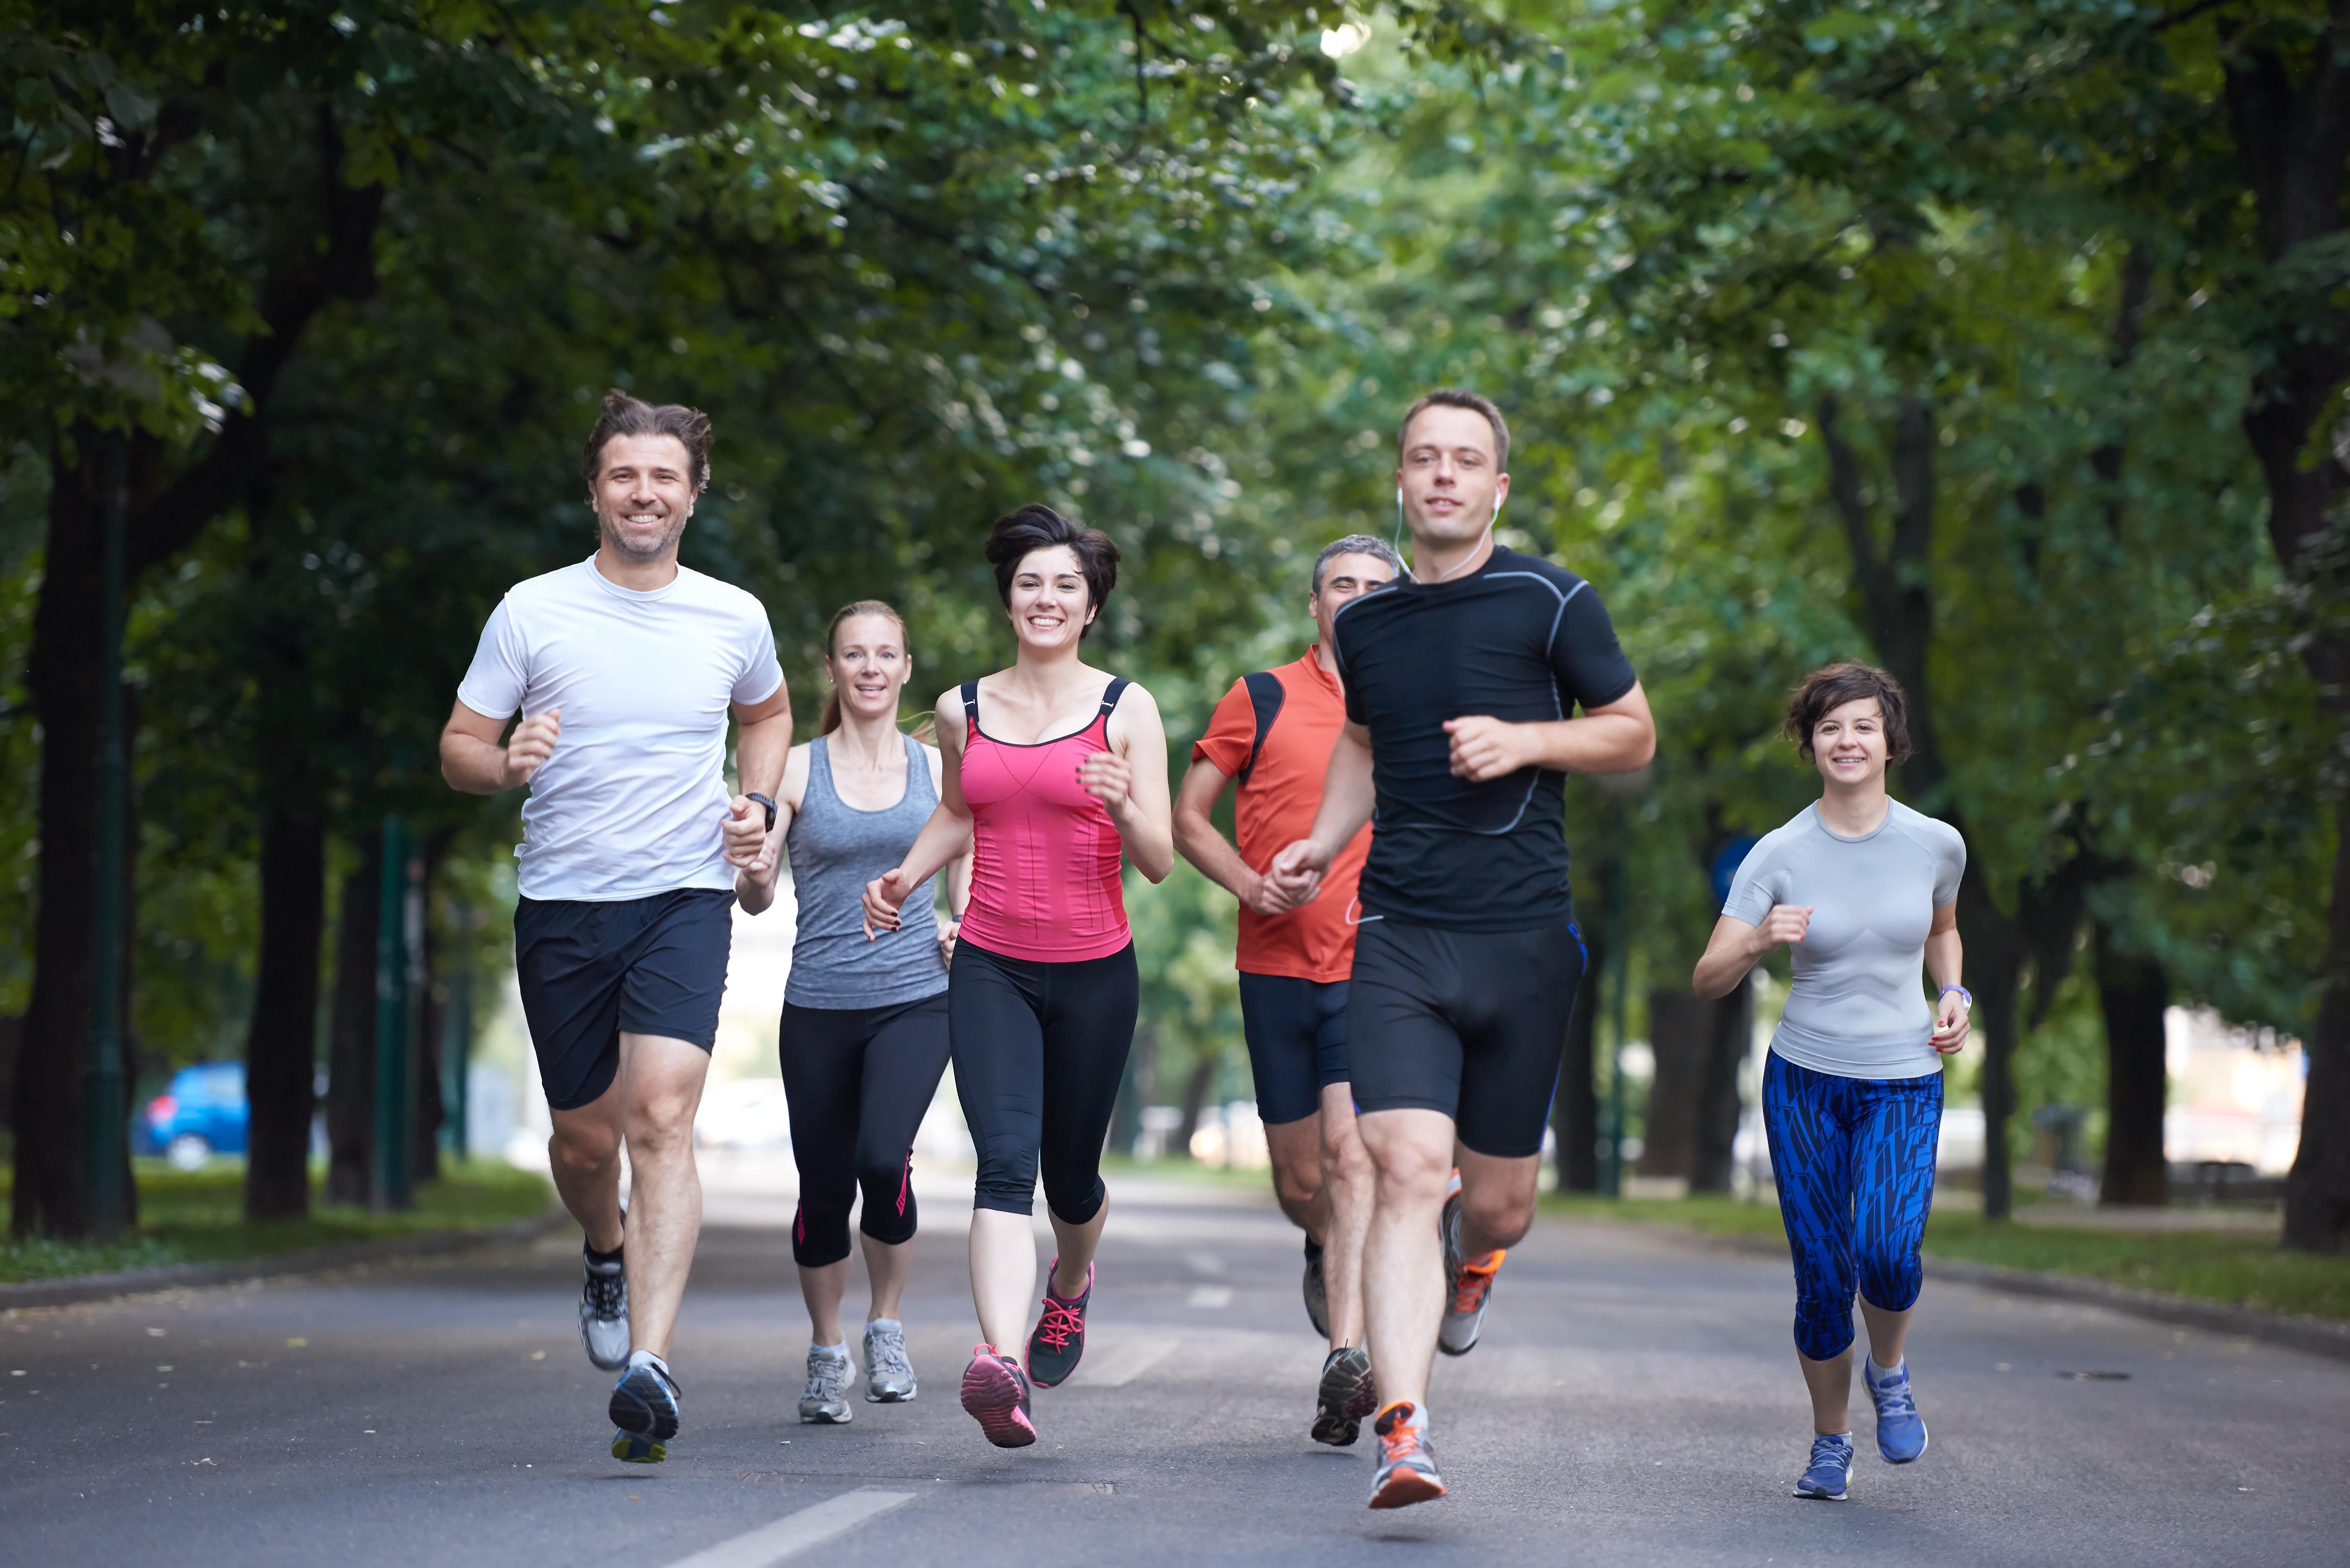 Men and women are jogging together